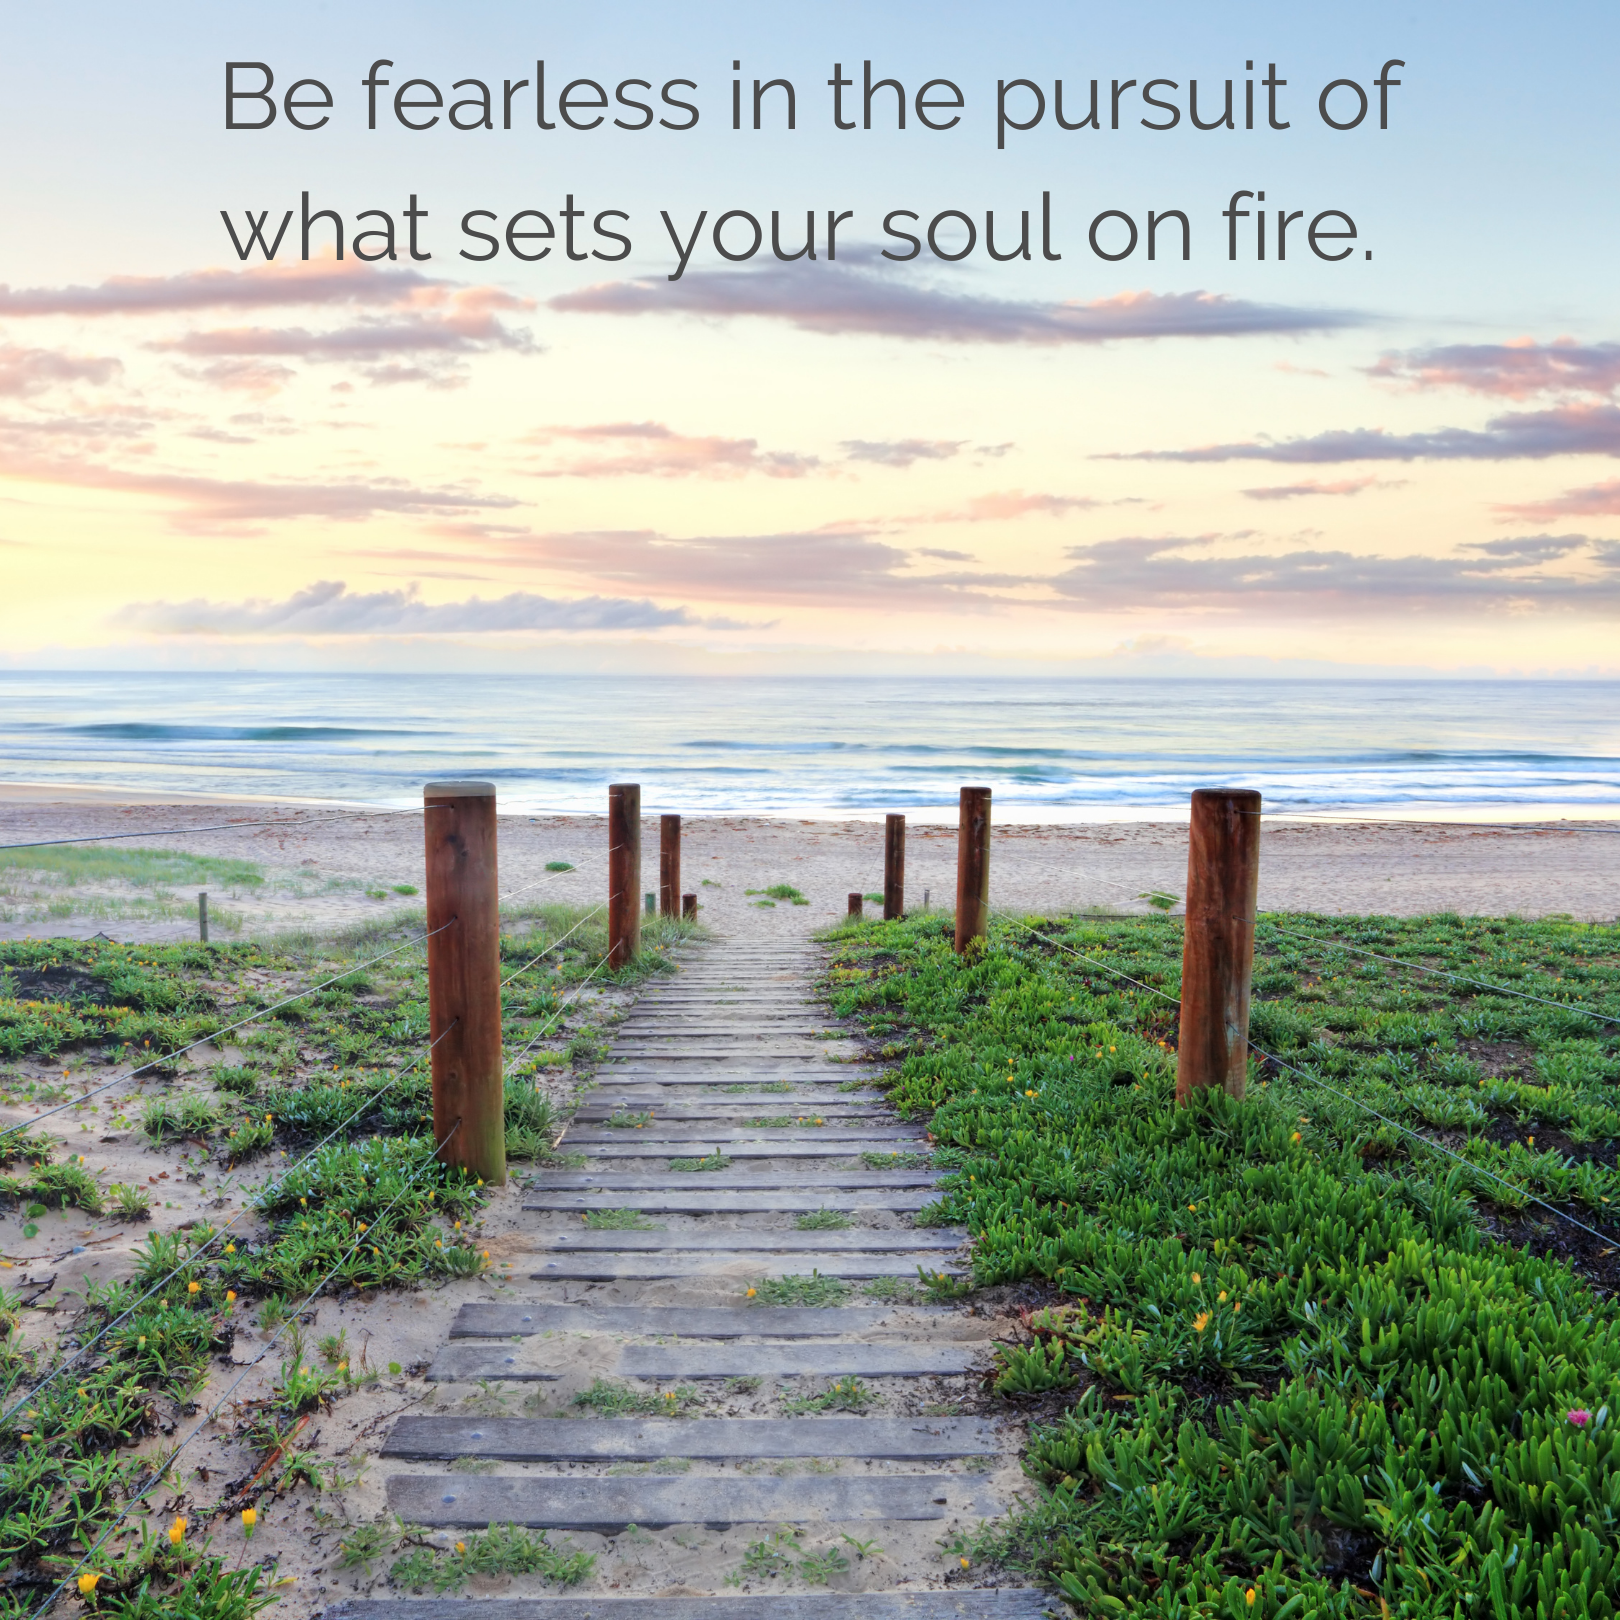 What sets your soul on fire? — Live Free Love Life